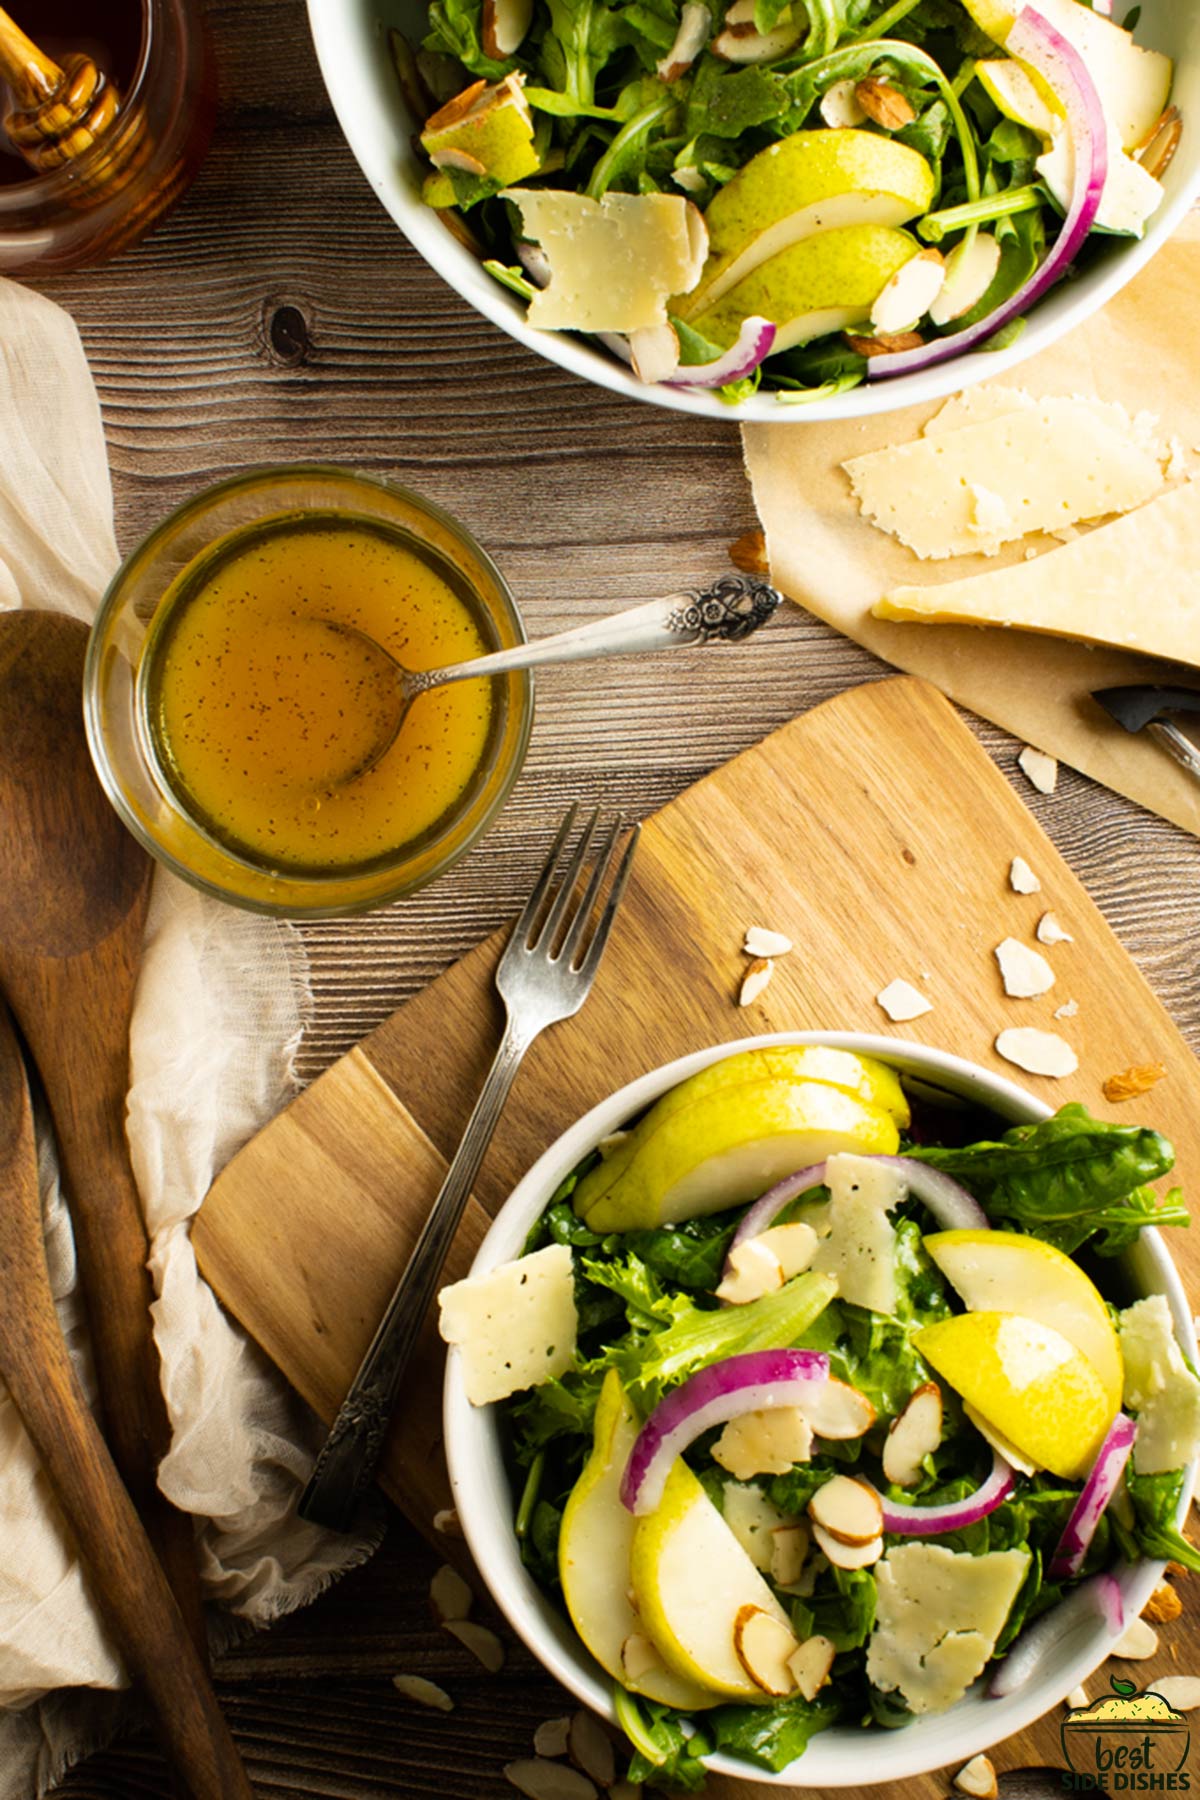 a bowl of salad on a cutting board next to a dish of vinaigrette, cheese and utensils